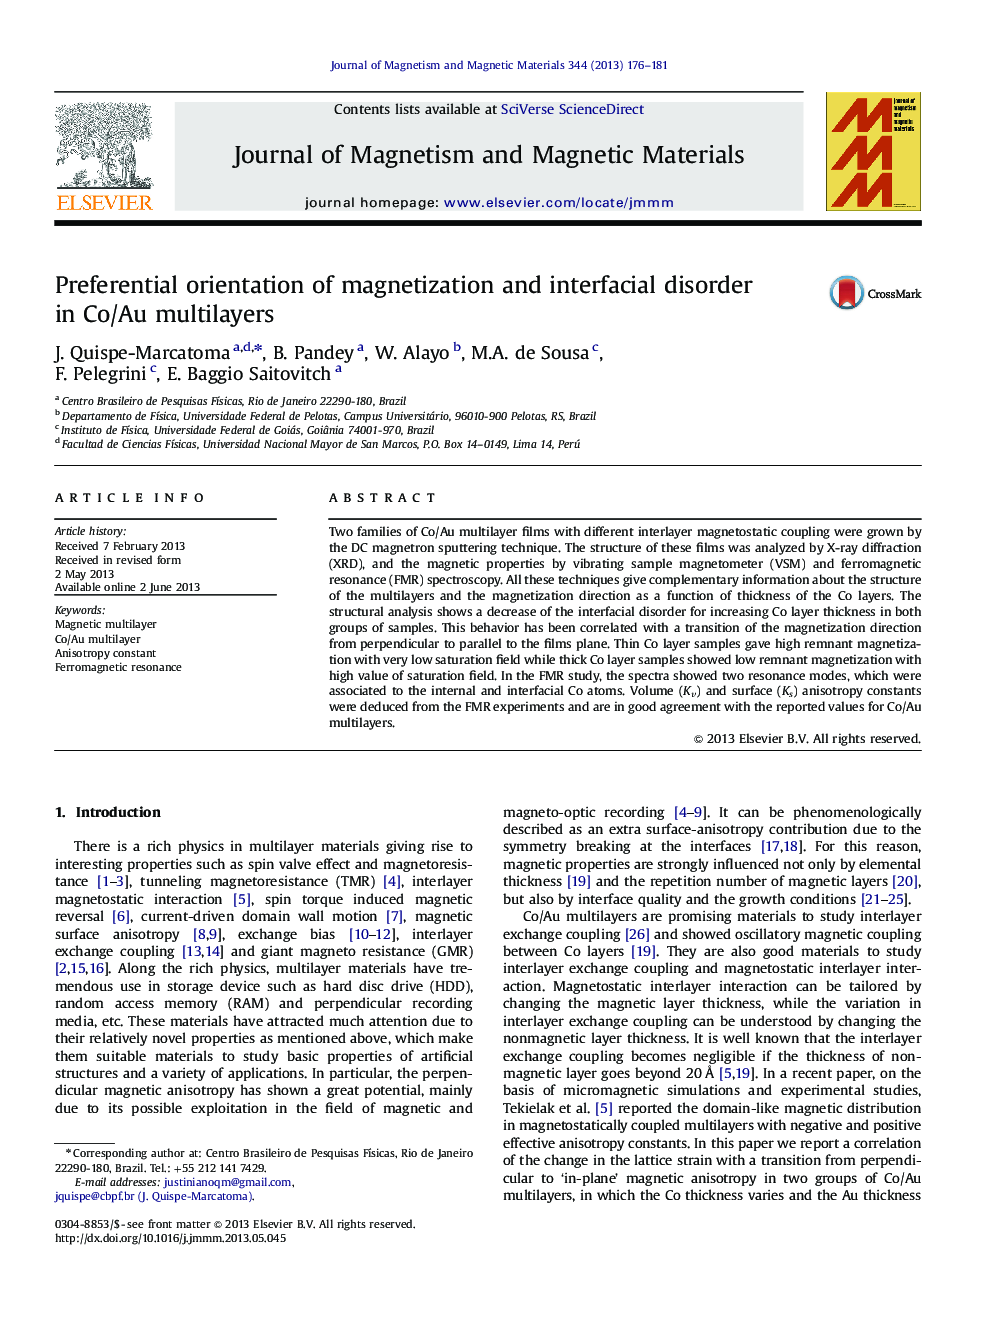 Preferential orientation of magnetization and interfacial disorder in Co/Au multilayers